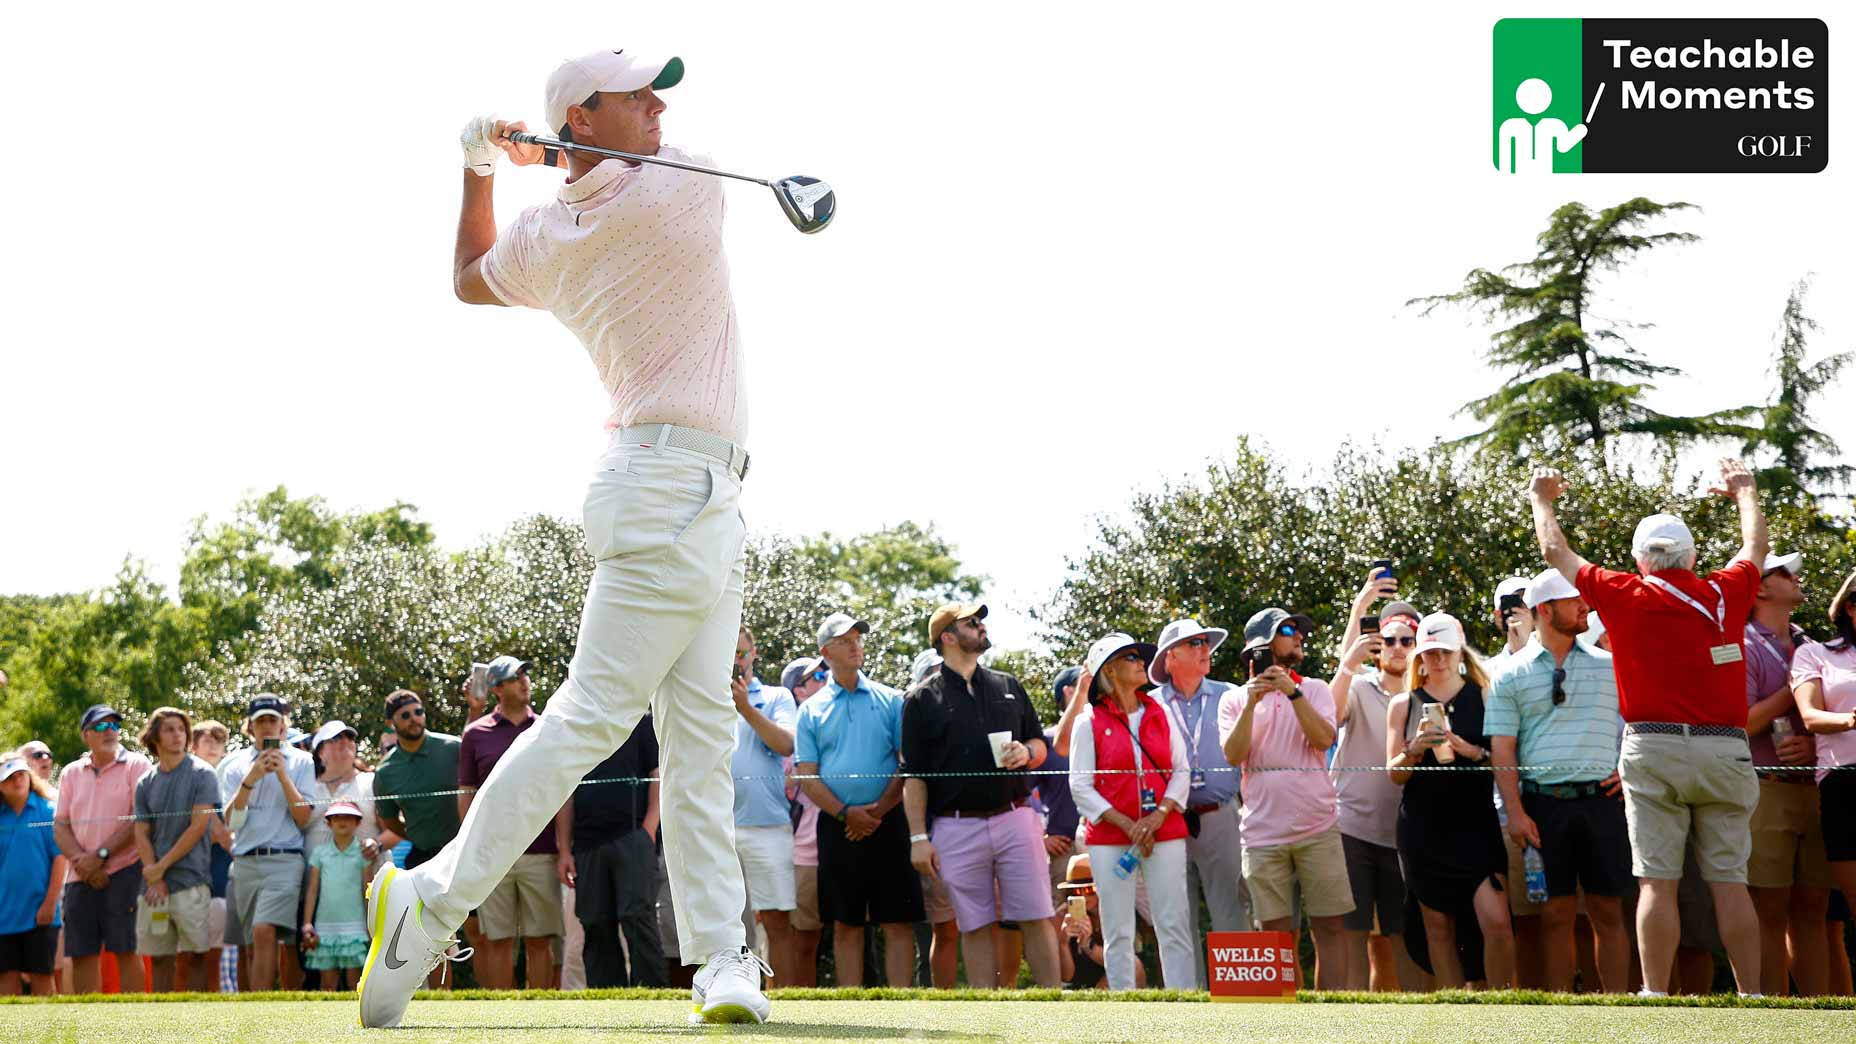 Copy Rory McIlroy's simple guide to shaping shots